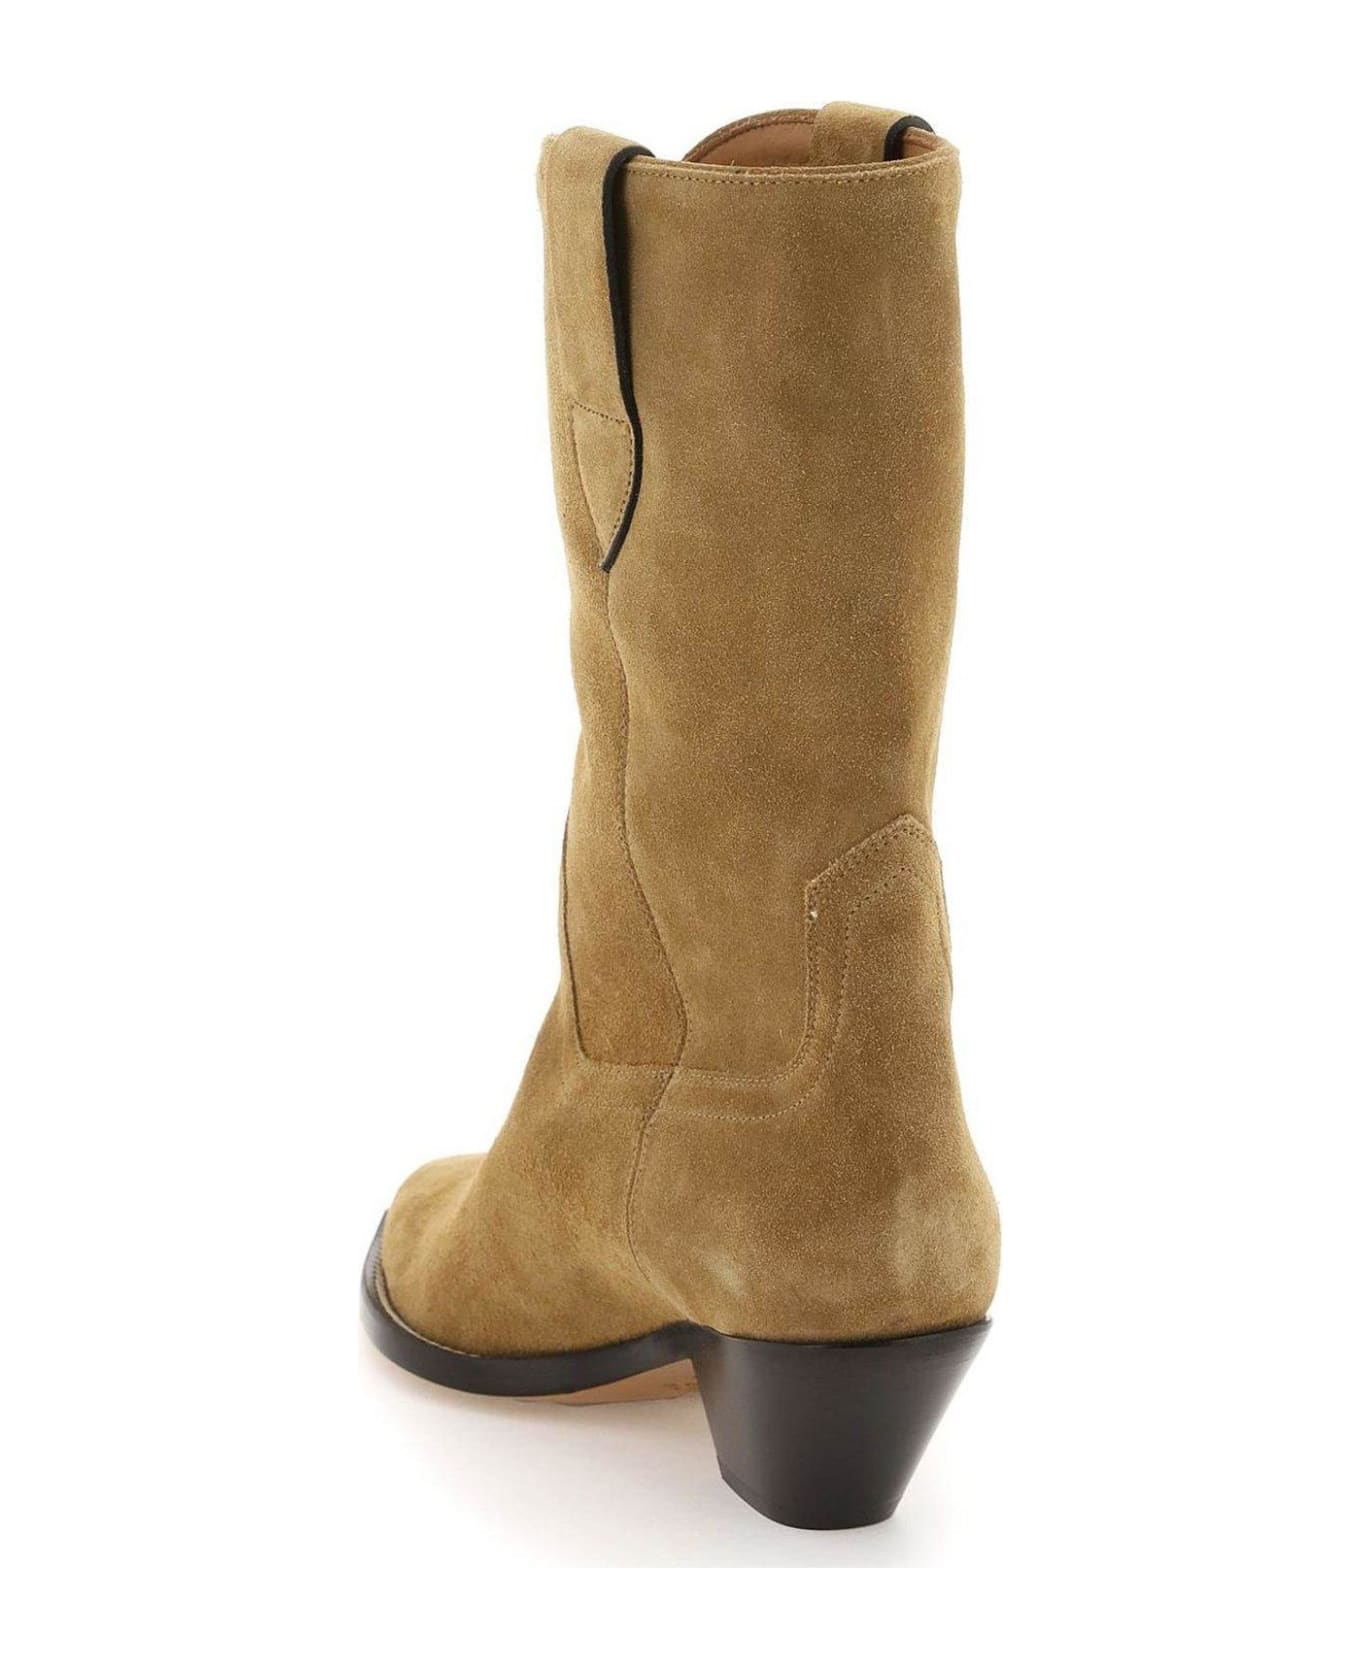 Isabel Marant Duerto Pointed Toe Boots - TAUPE